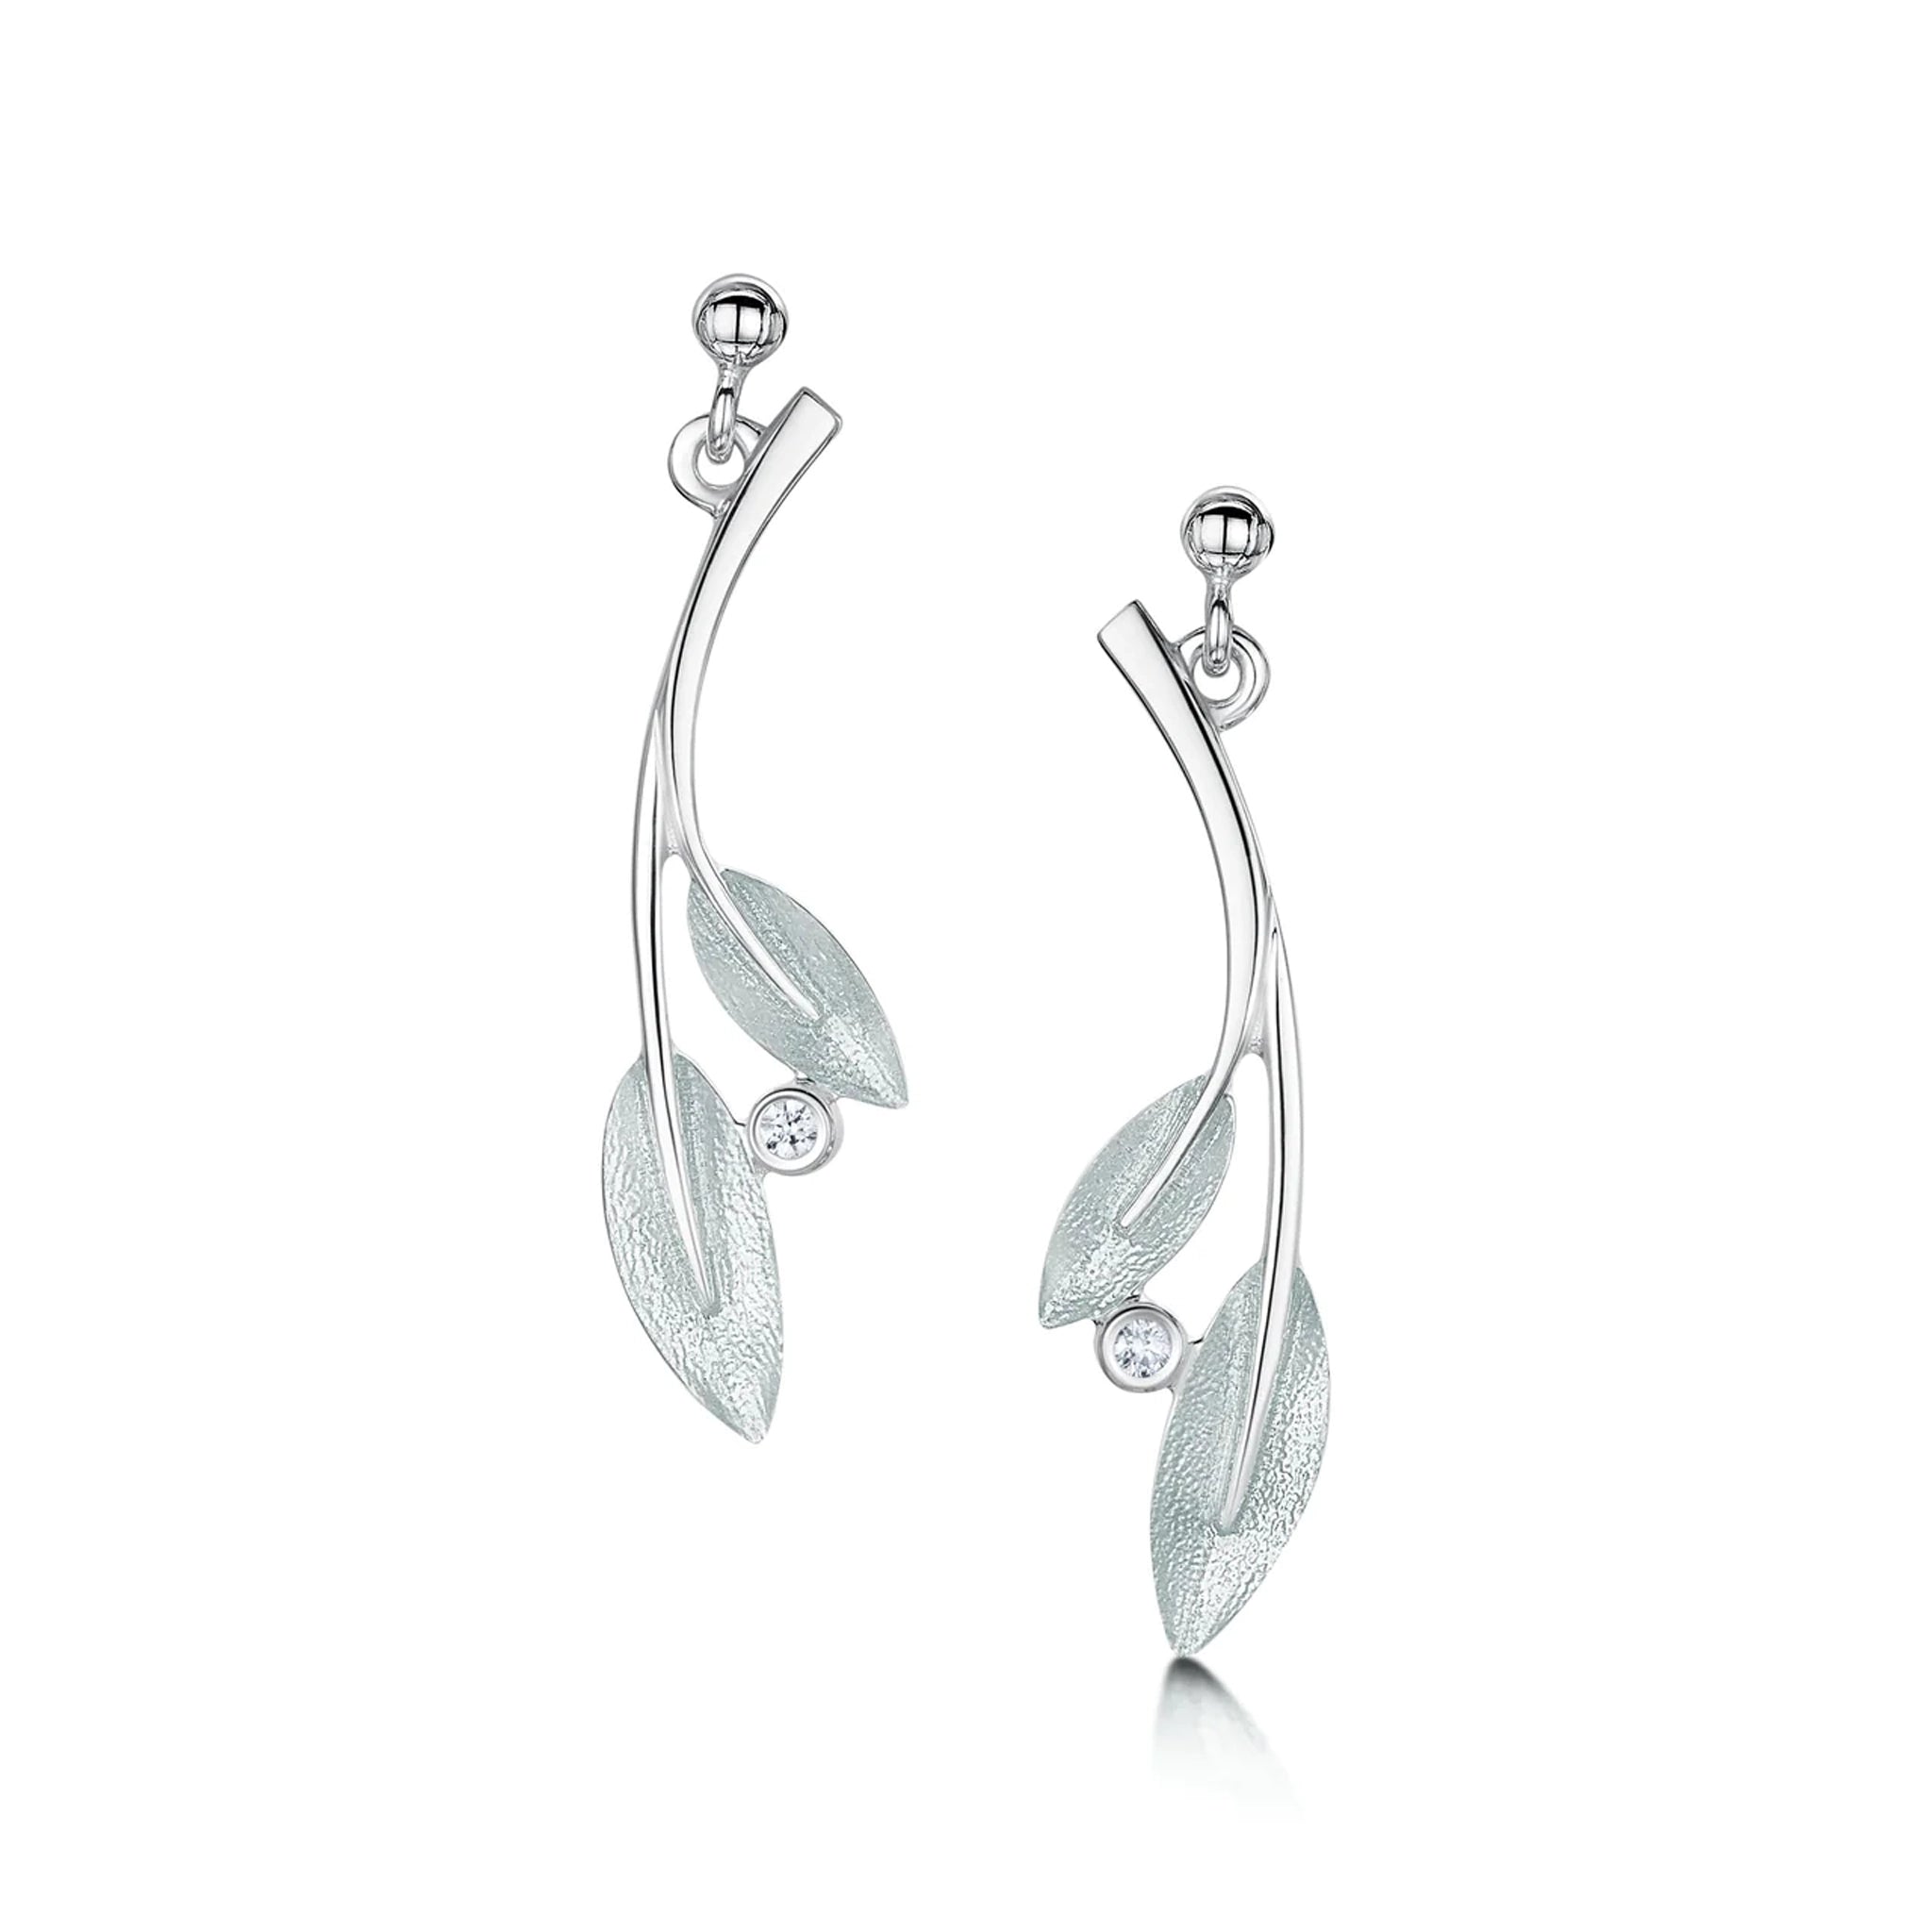 Silver earrings with double rowan tree leaves in a frosty white enamel and cubic zirconia, with stud post fittings